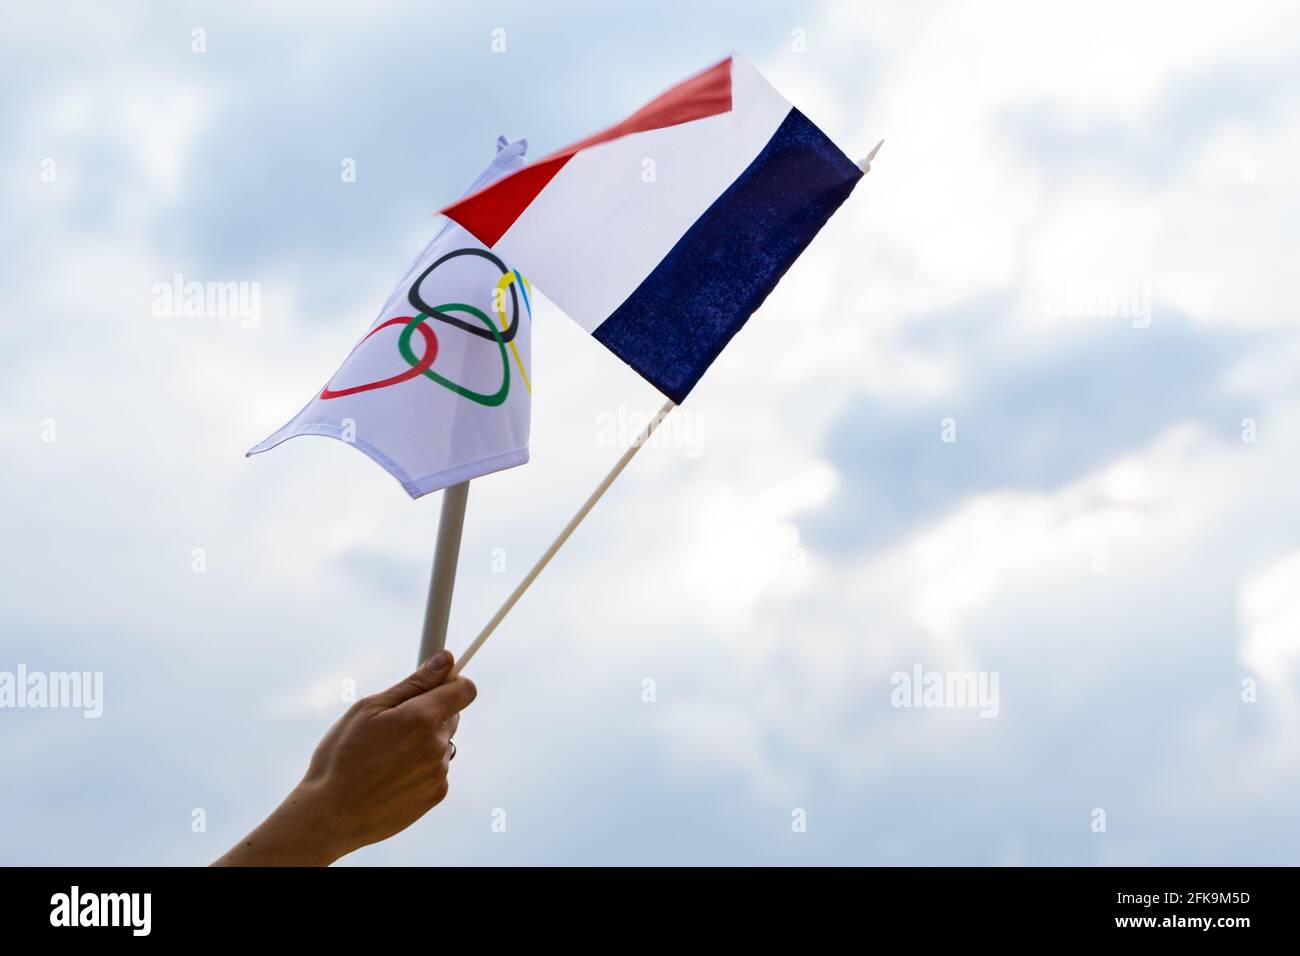 Fan waving the national flag of  France and the Olympic flag with symbol olympics rings. Stock Photo